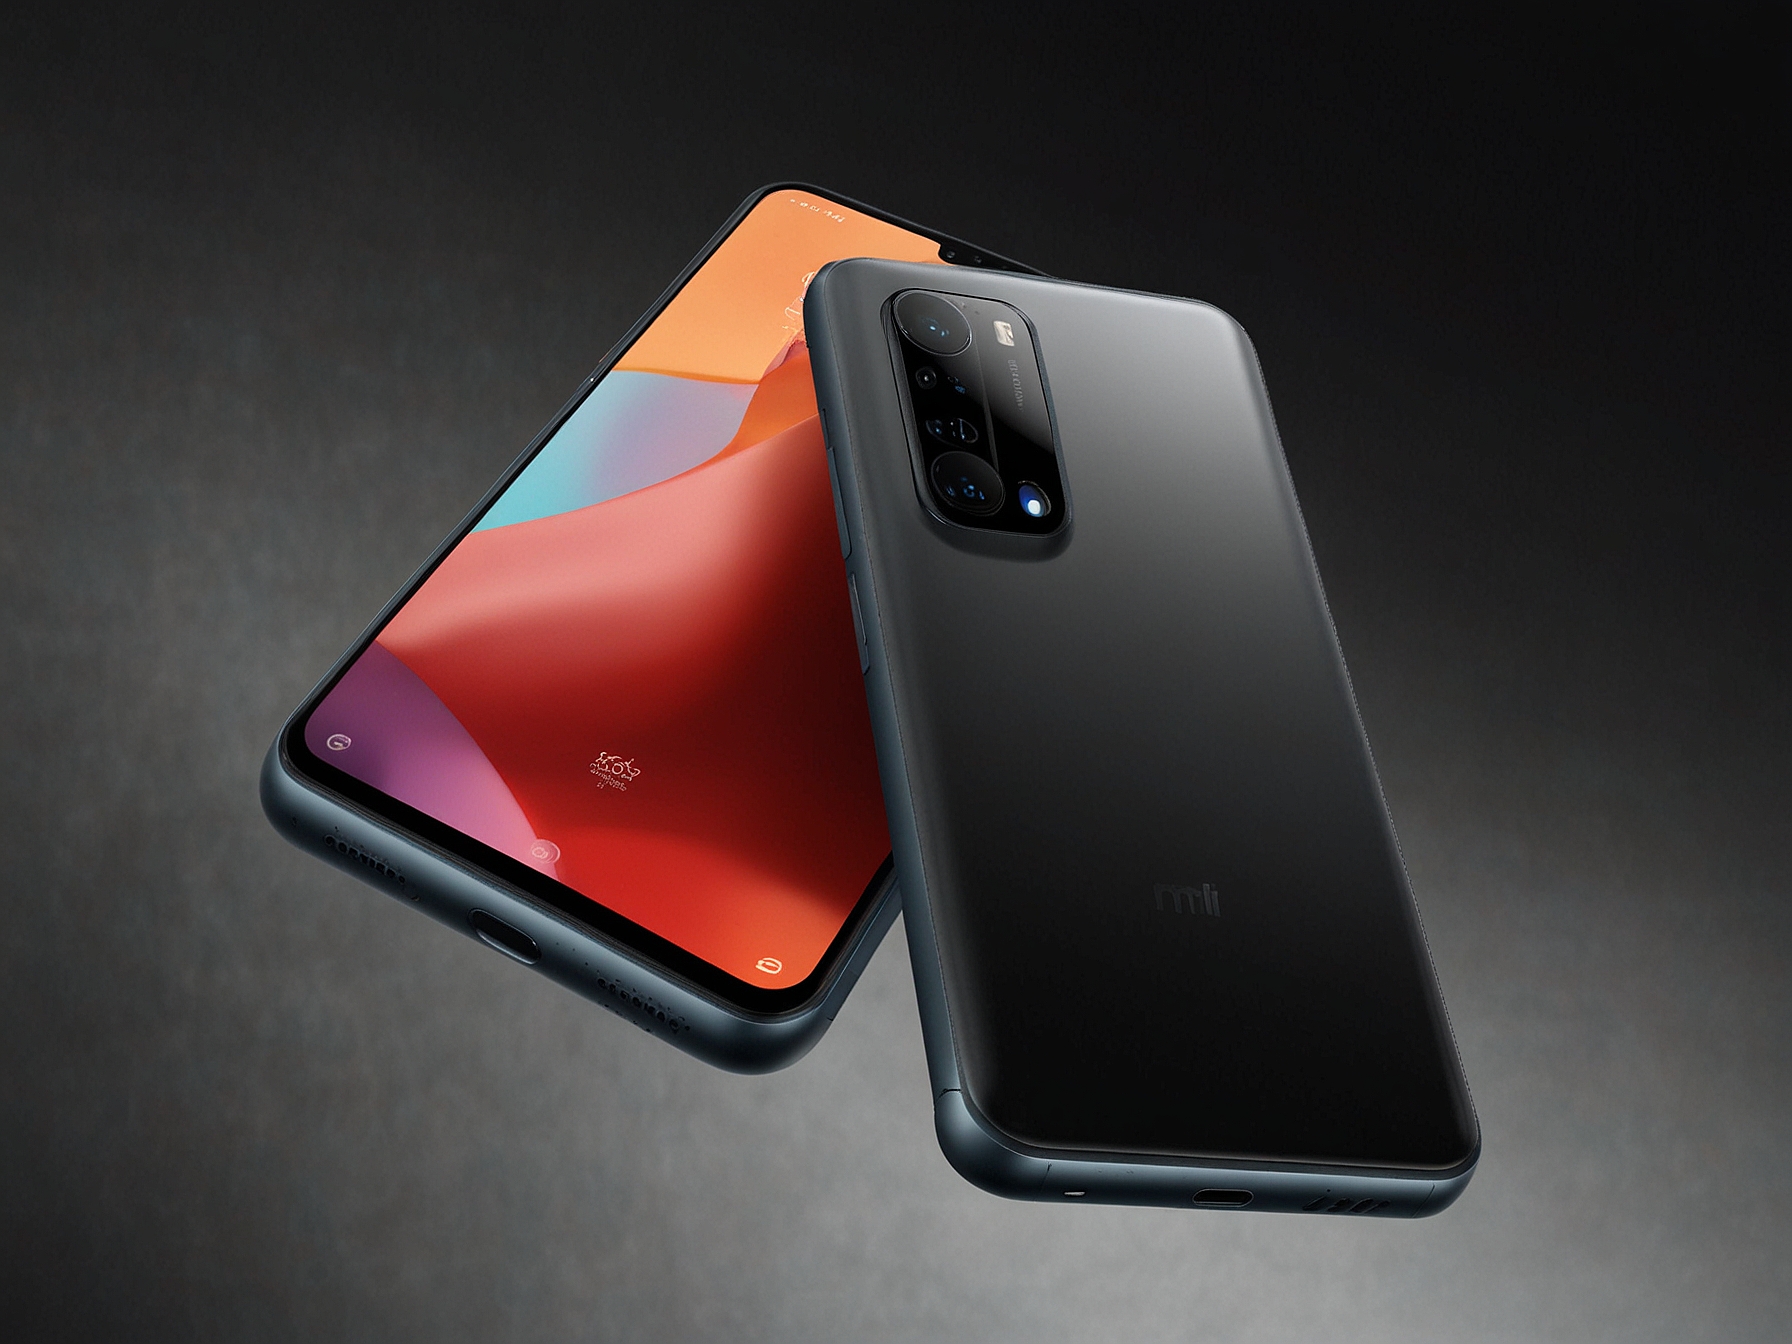 A conceptual image of the Redmi 14C 5G displaying potential hardware upgrades and 5G capabilities. The image emphasizes the anticipated improvements over the previous Redmi 13C 5G model.